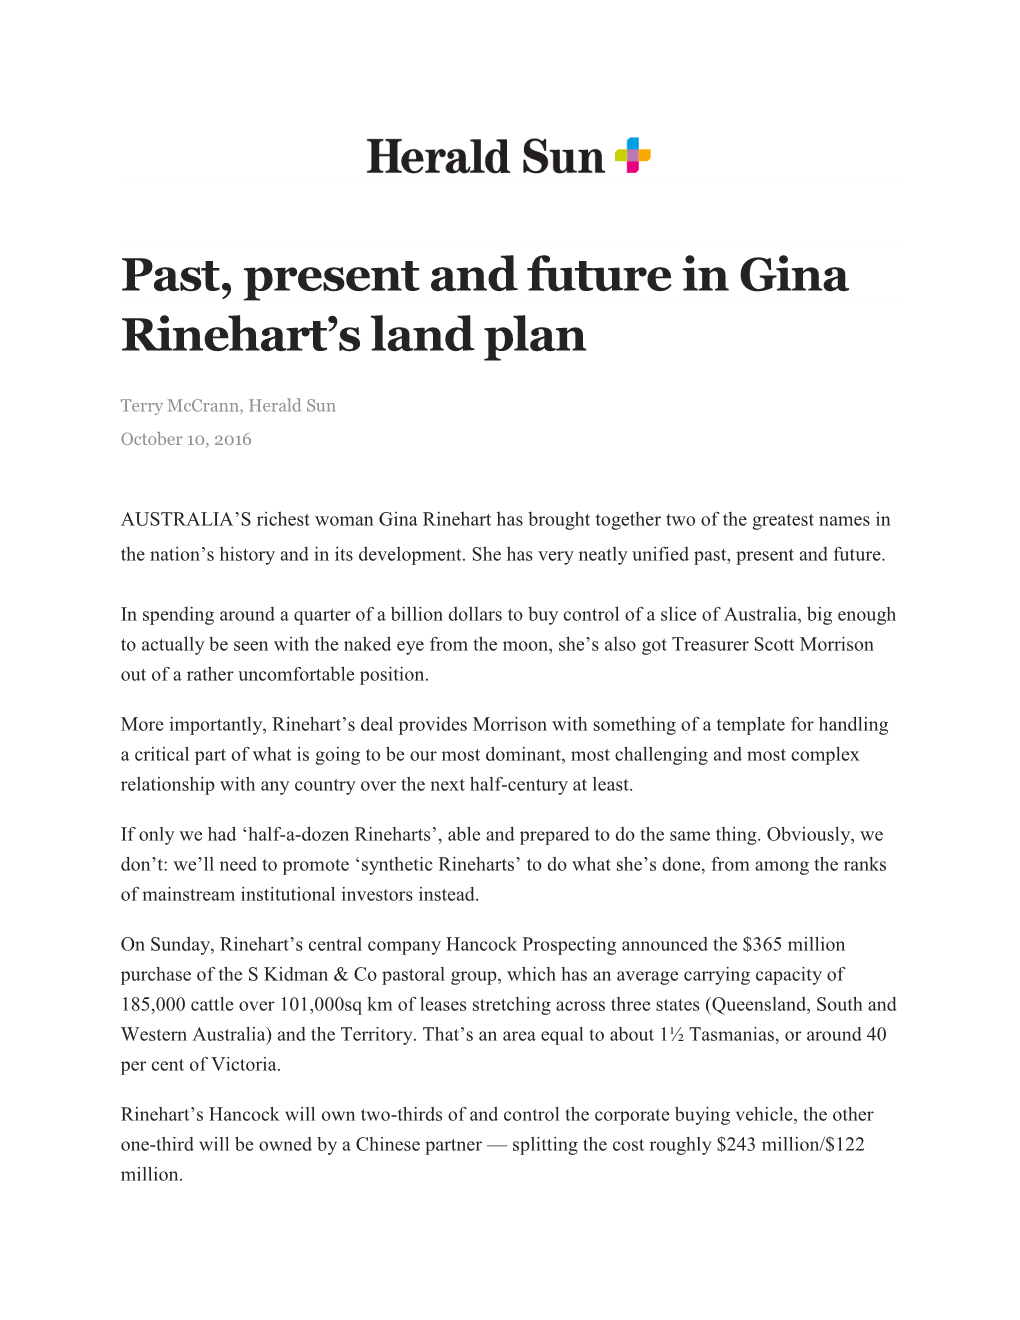 Past, Present and Future in Gina Rinehart's Land Plan